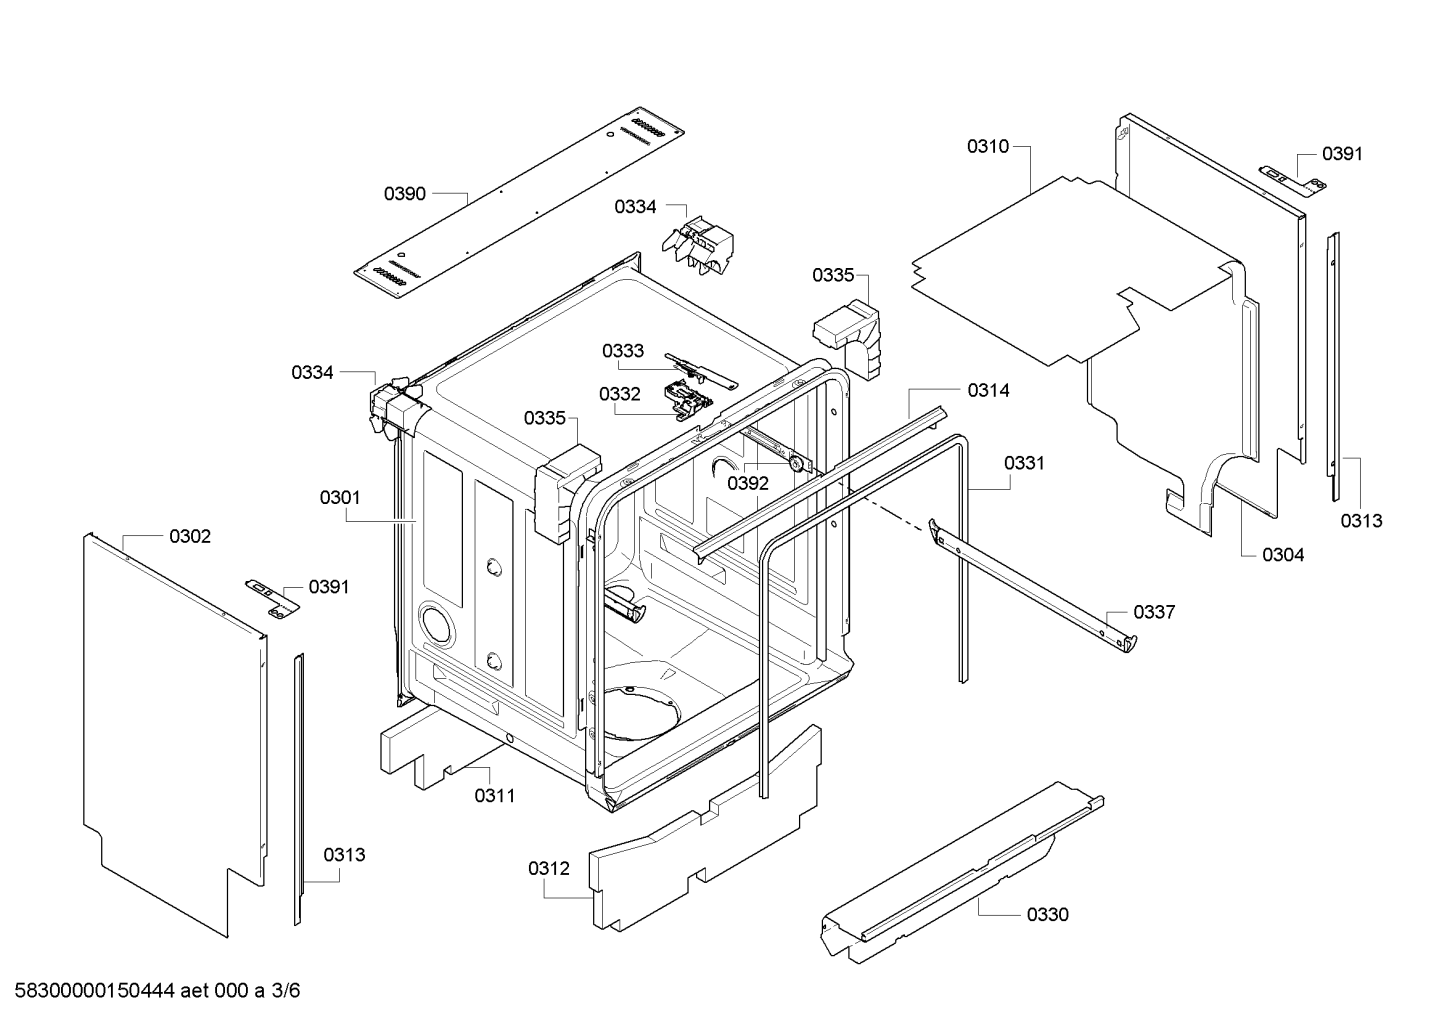 drawing_link_3_device_1767552